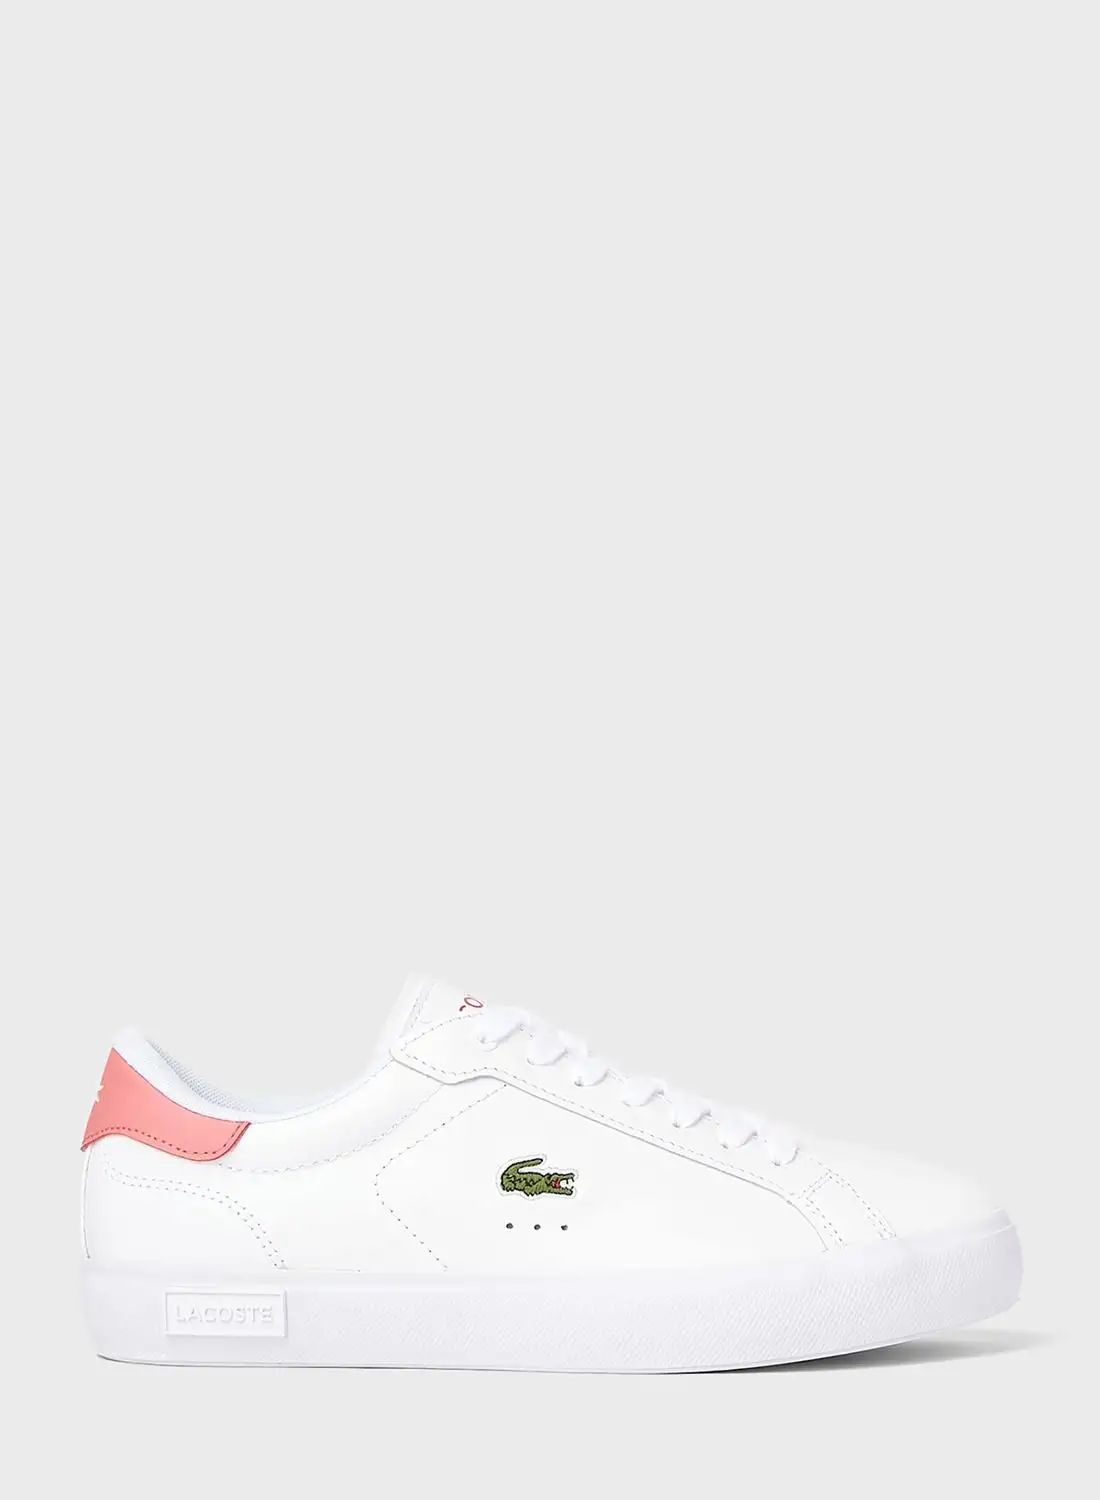 LACOSTE Powercourt Leather Sneakers